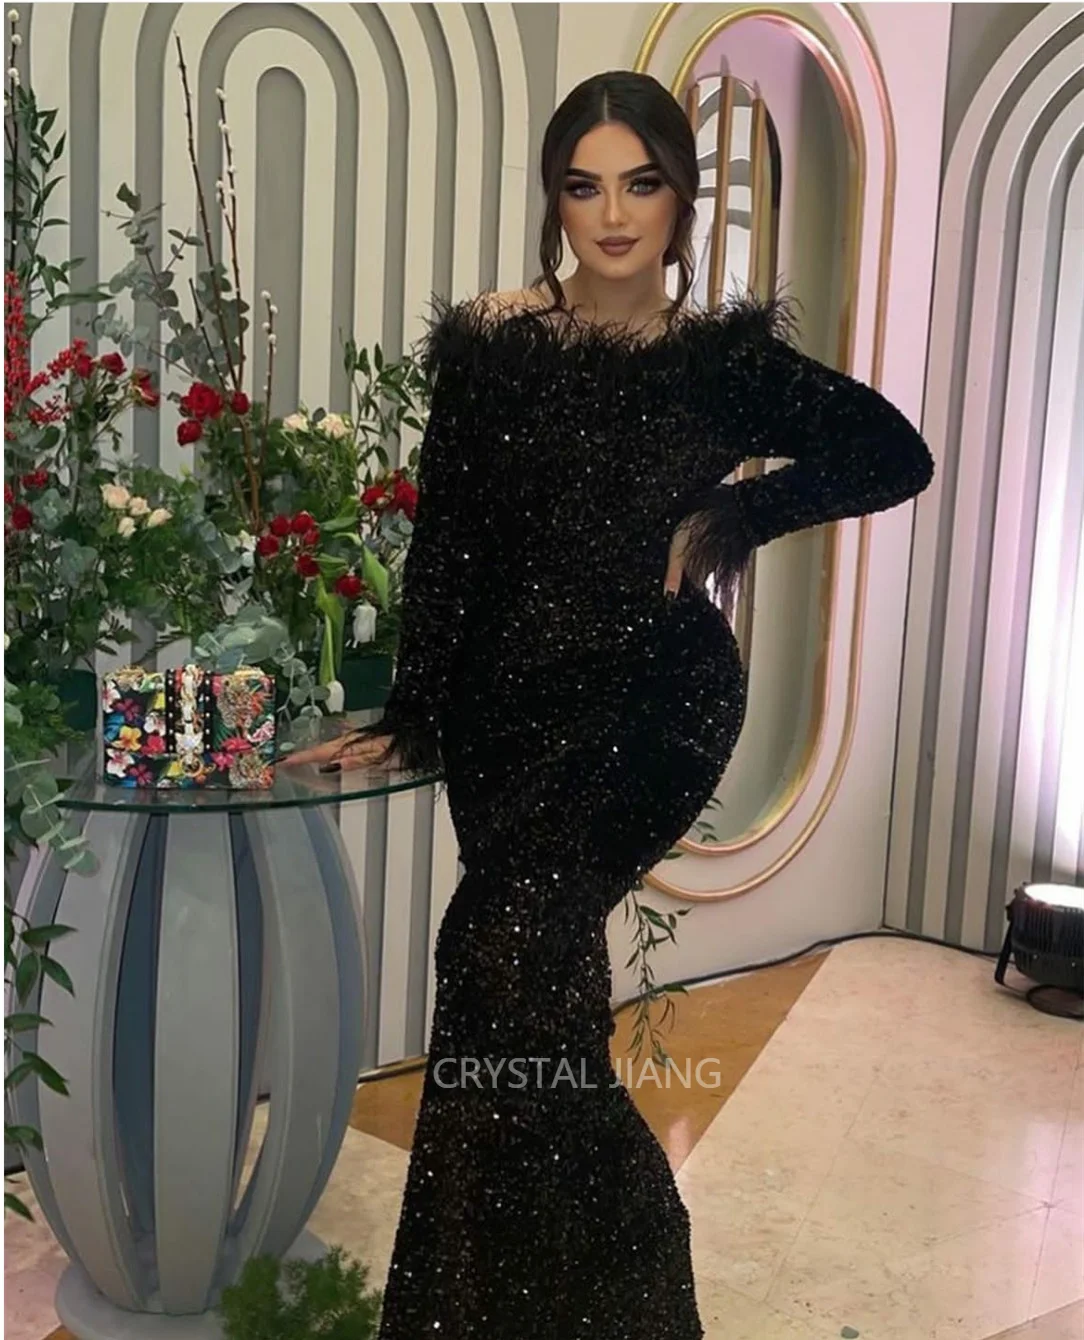 

Classy Long Sequined Boat Neck Evening Dresses Full Sleeves with Feathers Sheath Mermaid Sweep Train Party Dresses for Women